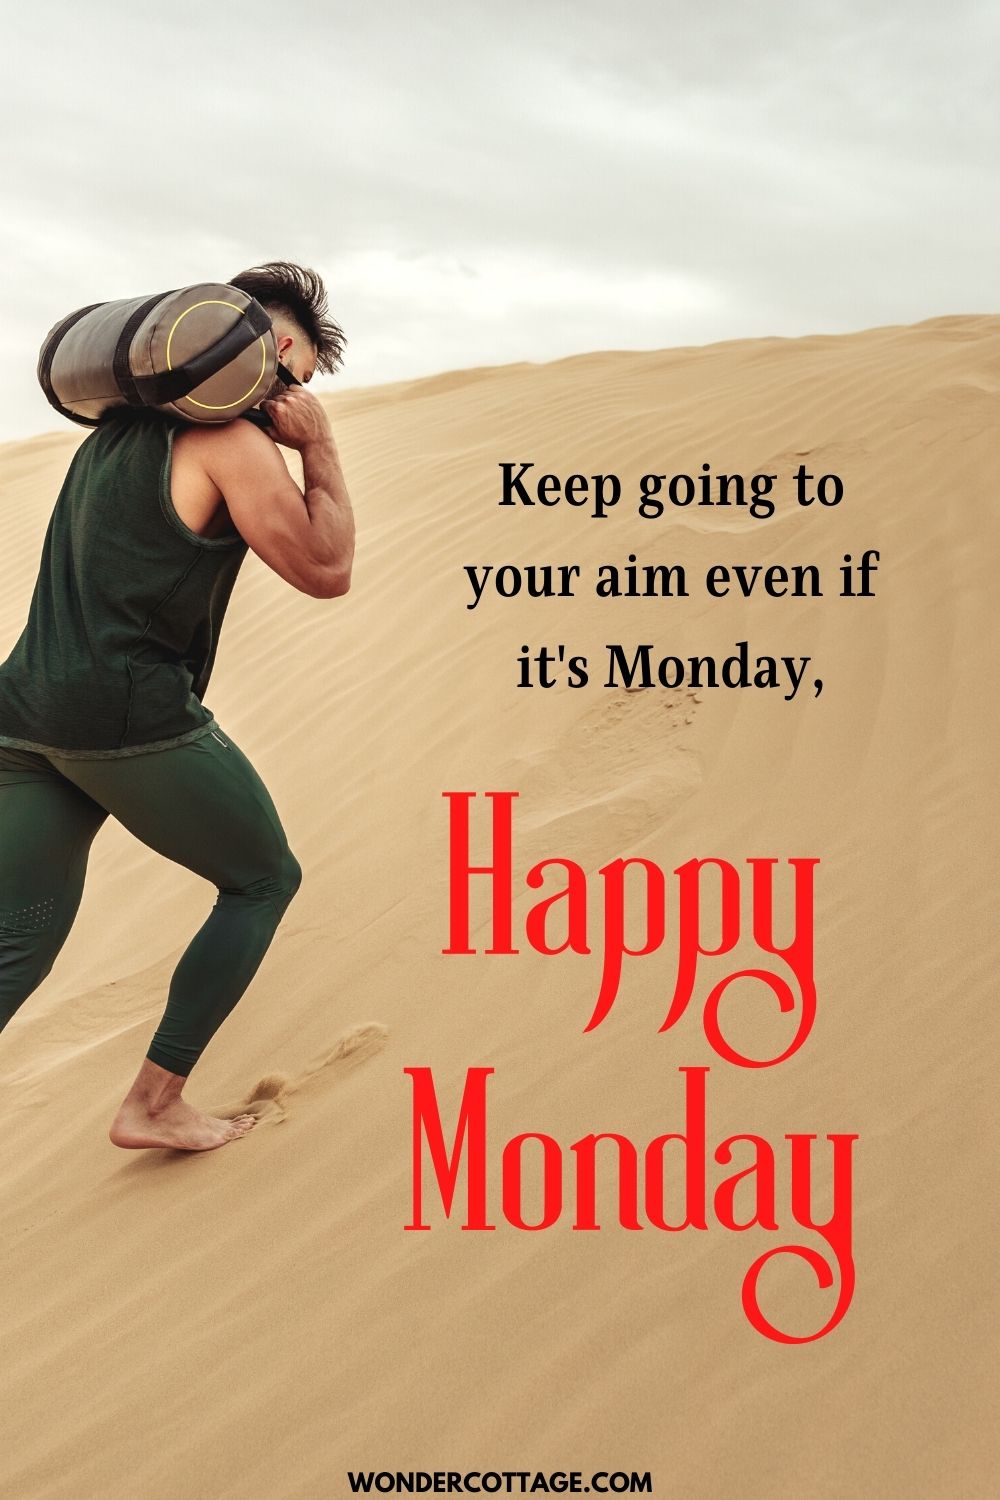 Keep going to your aim even if it's Monday, Happy Monday